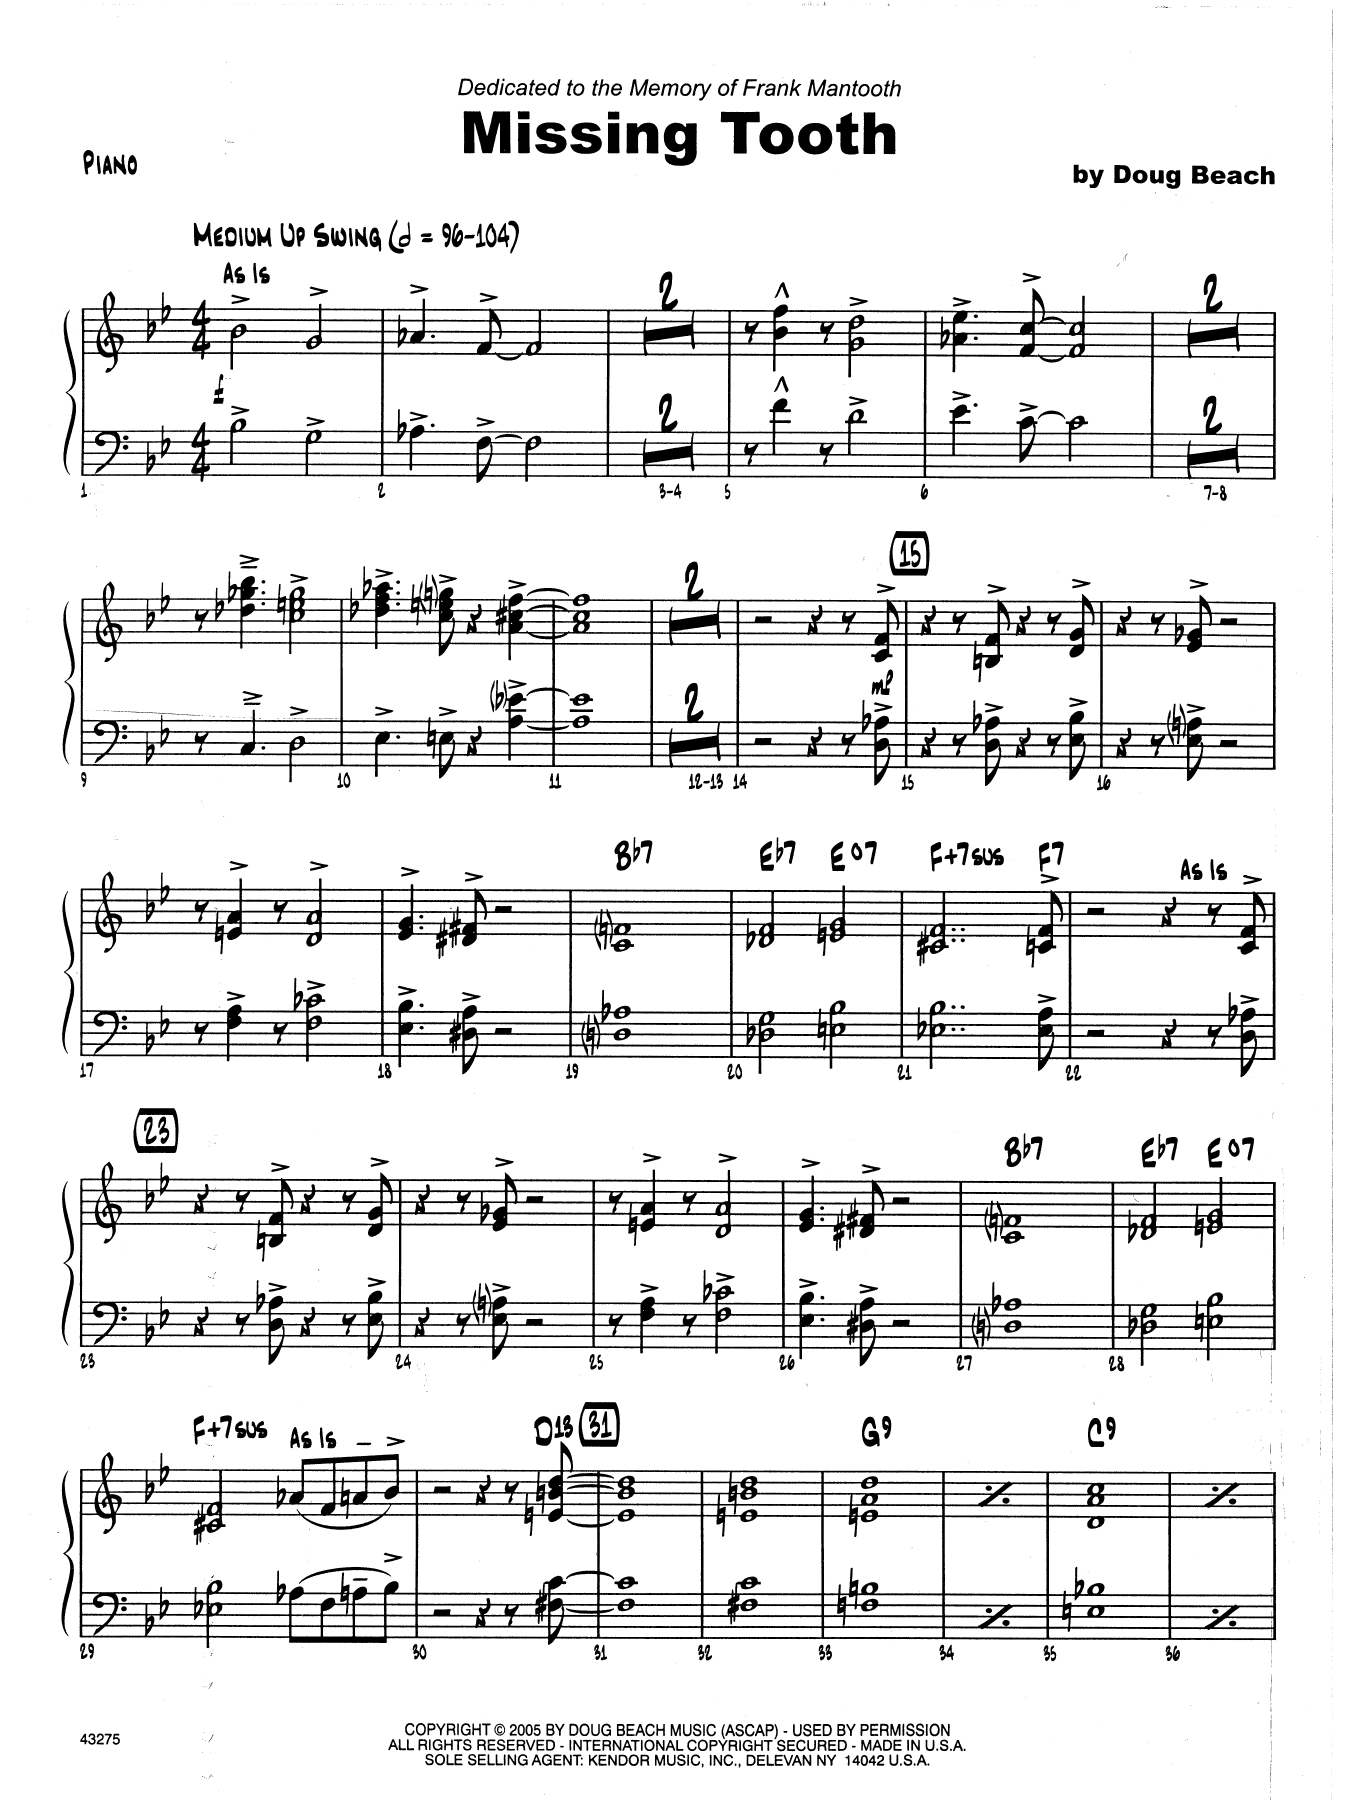 Download Doug Beach Missing Tooth - Piano Sheet Music